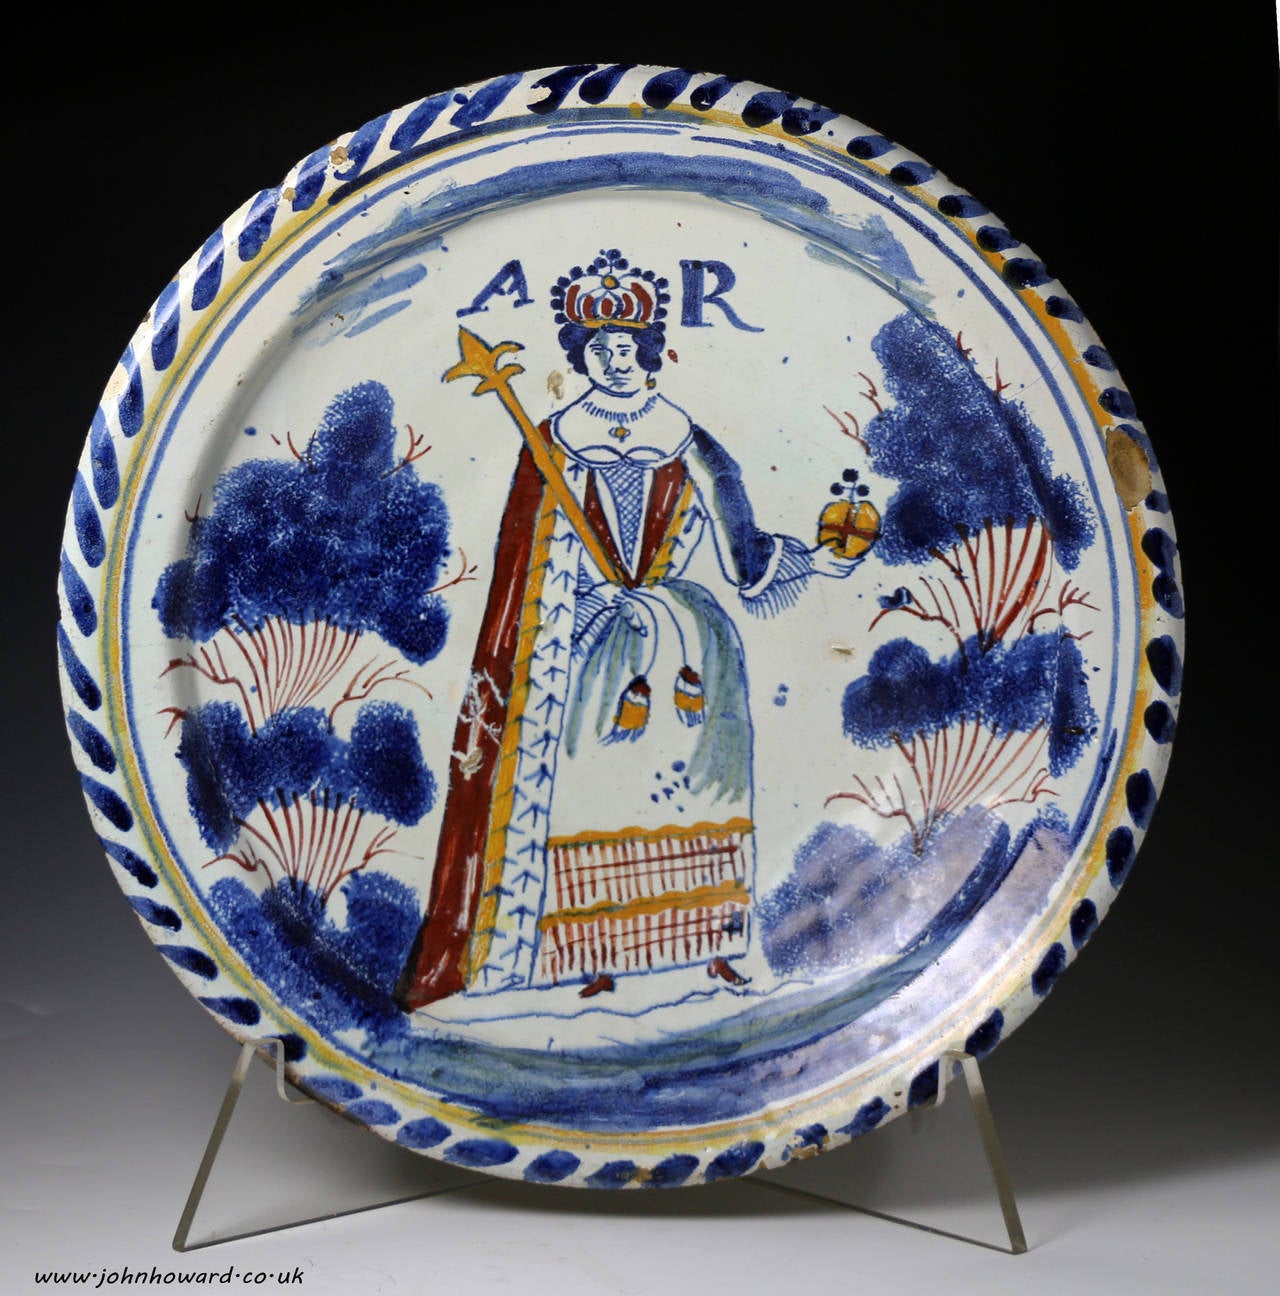 A fine and rare English delftware pottery blue dash charger with the royal portrait of Queen Anne and initials A R. The Queen is crowned and holding an orbe and sceptre.